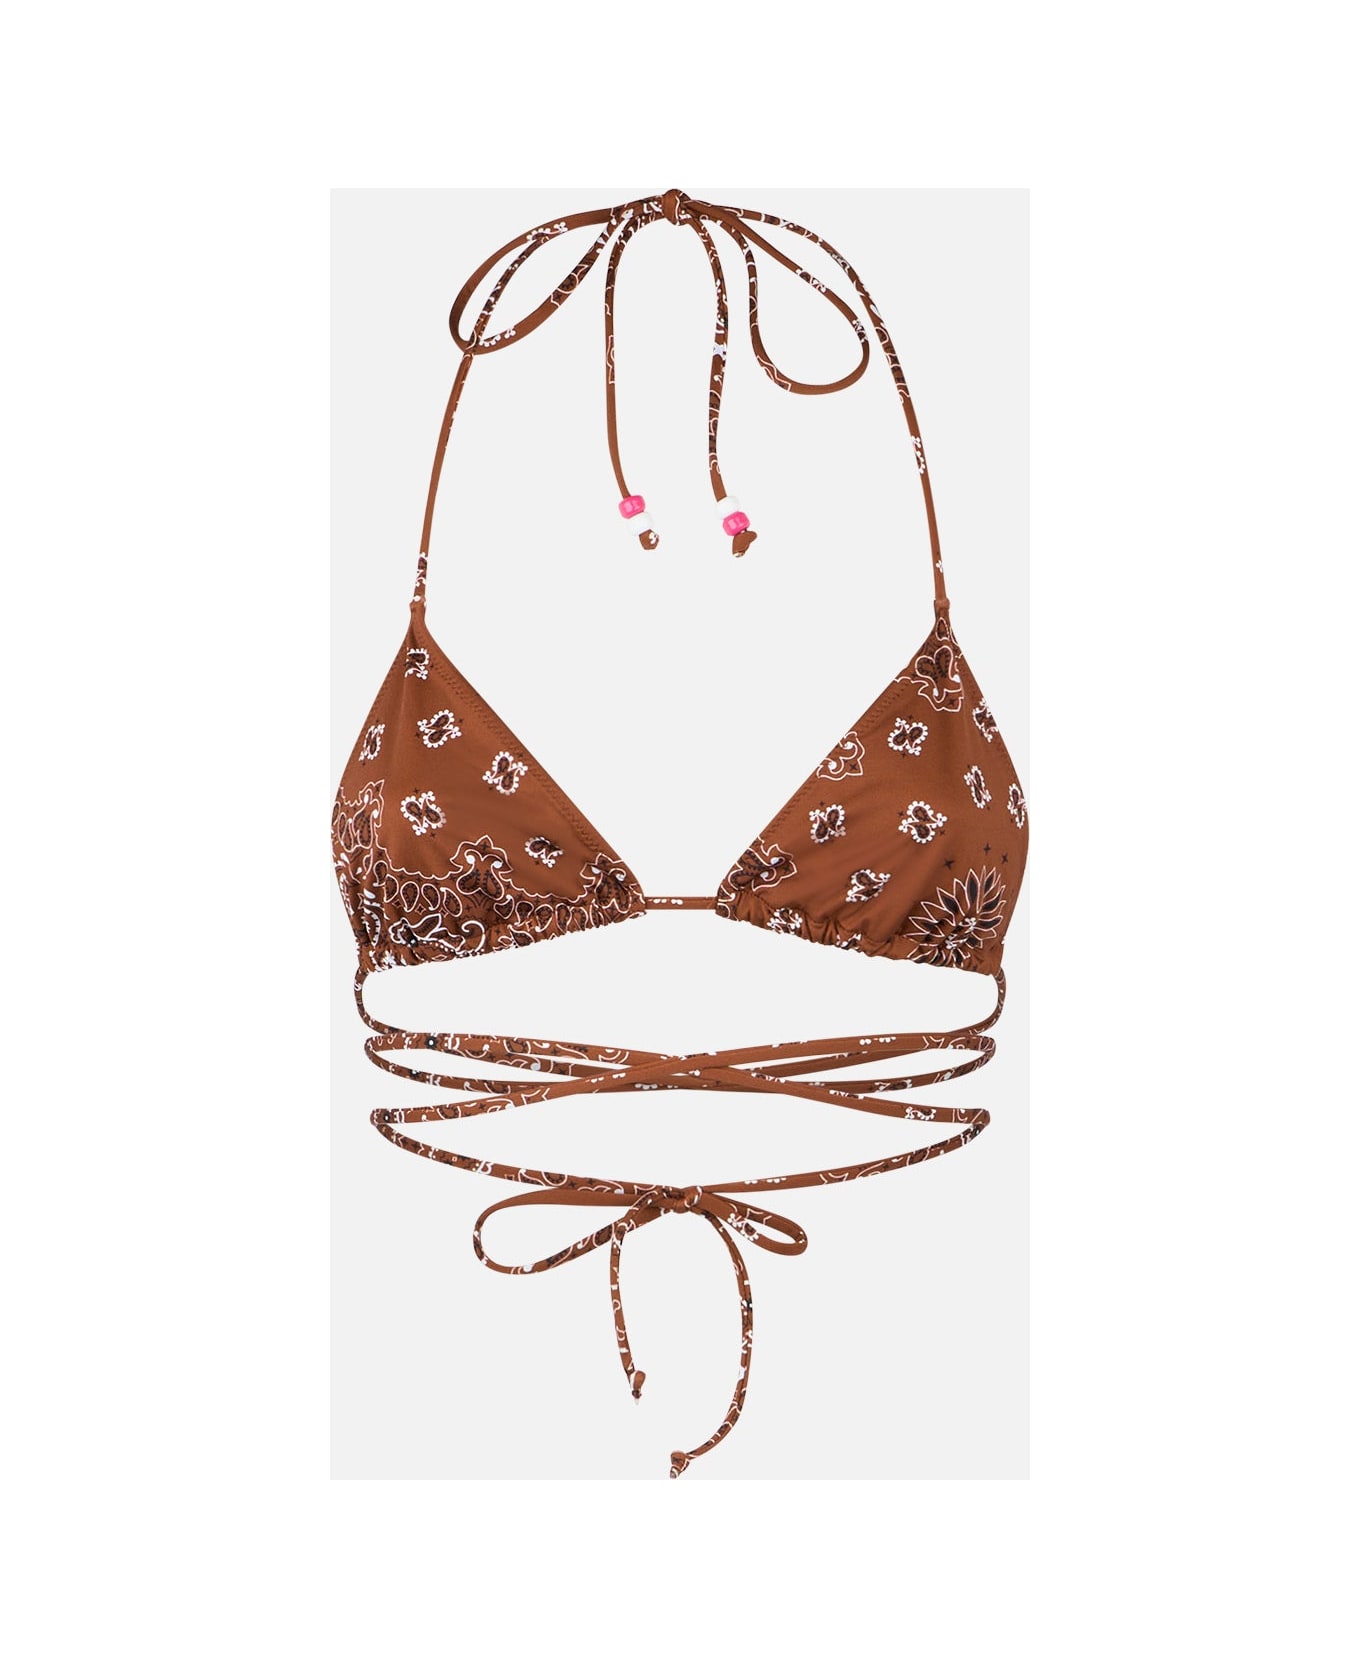 MC2 Saint Barth Woman Strappy Triangle Top Swimsuit - BROWN